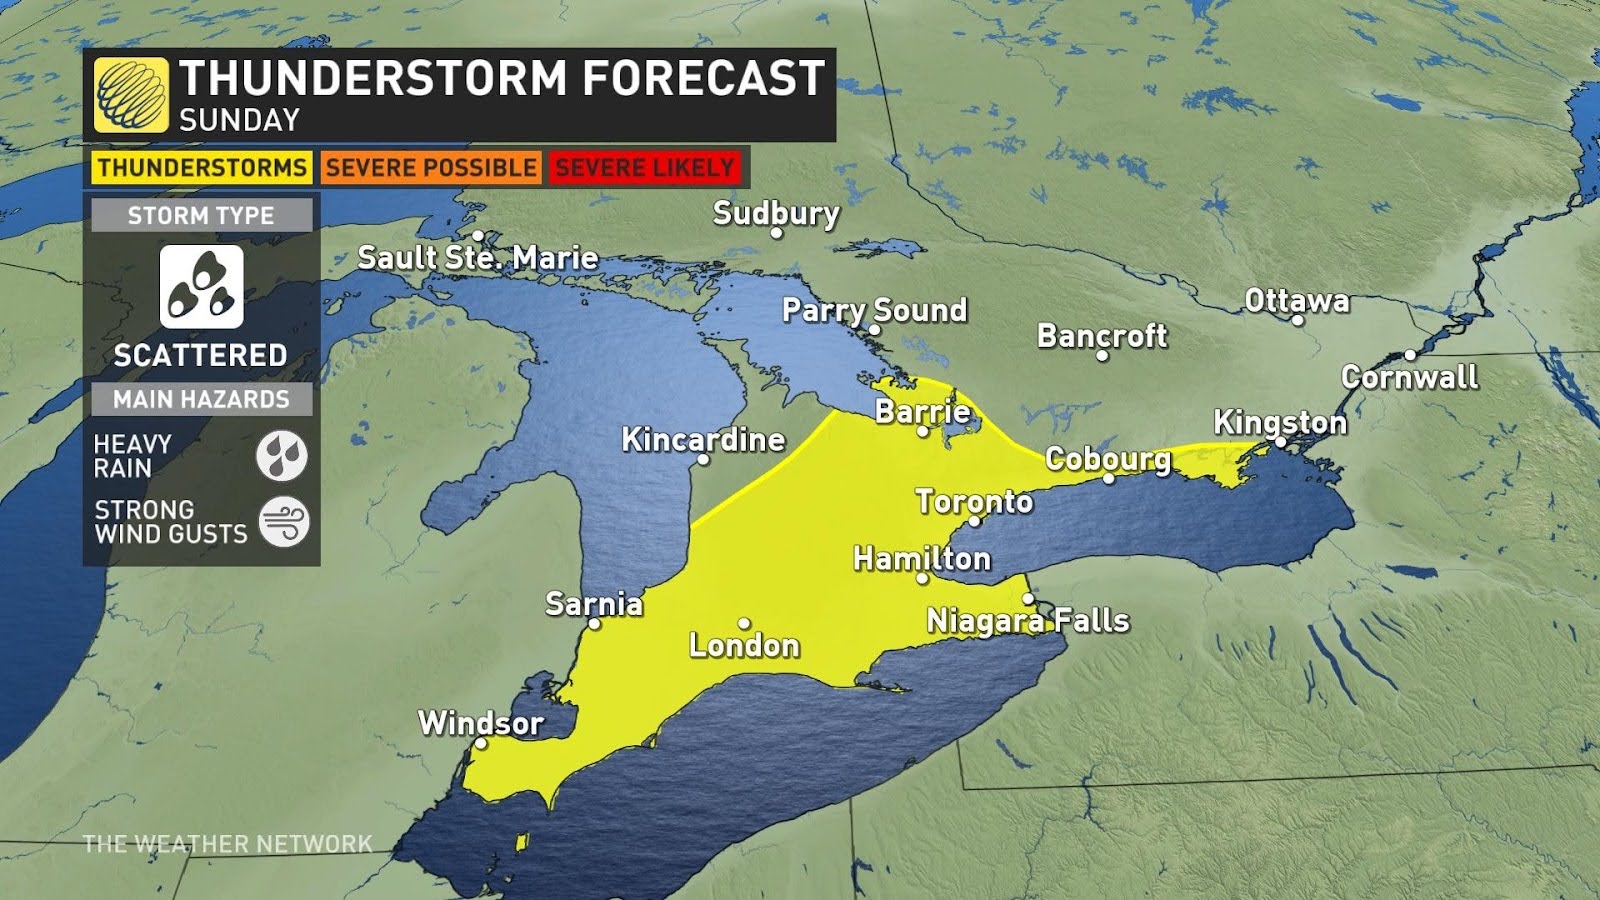 showers, thunderstorm risk rain on southern ontario's weekend parade